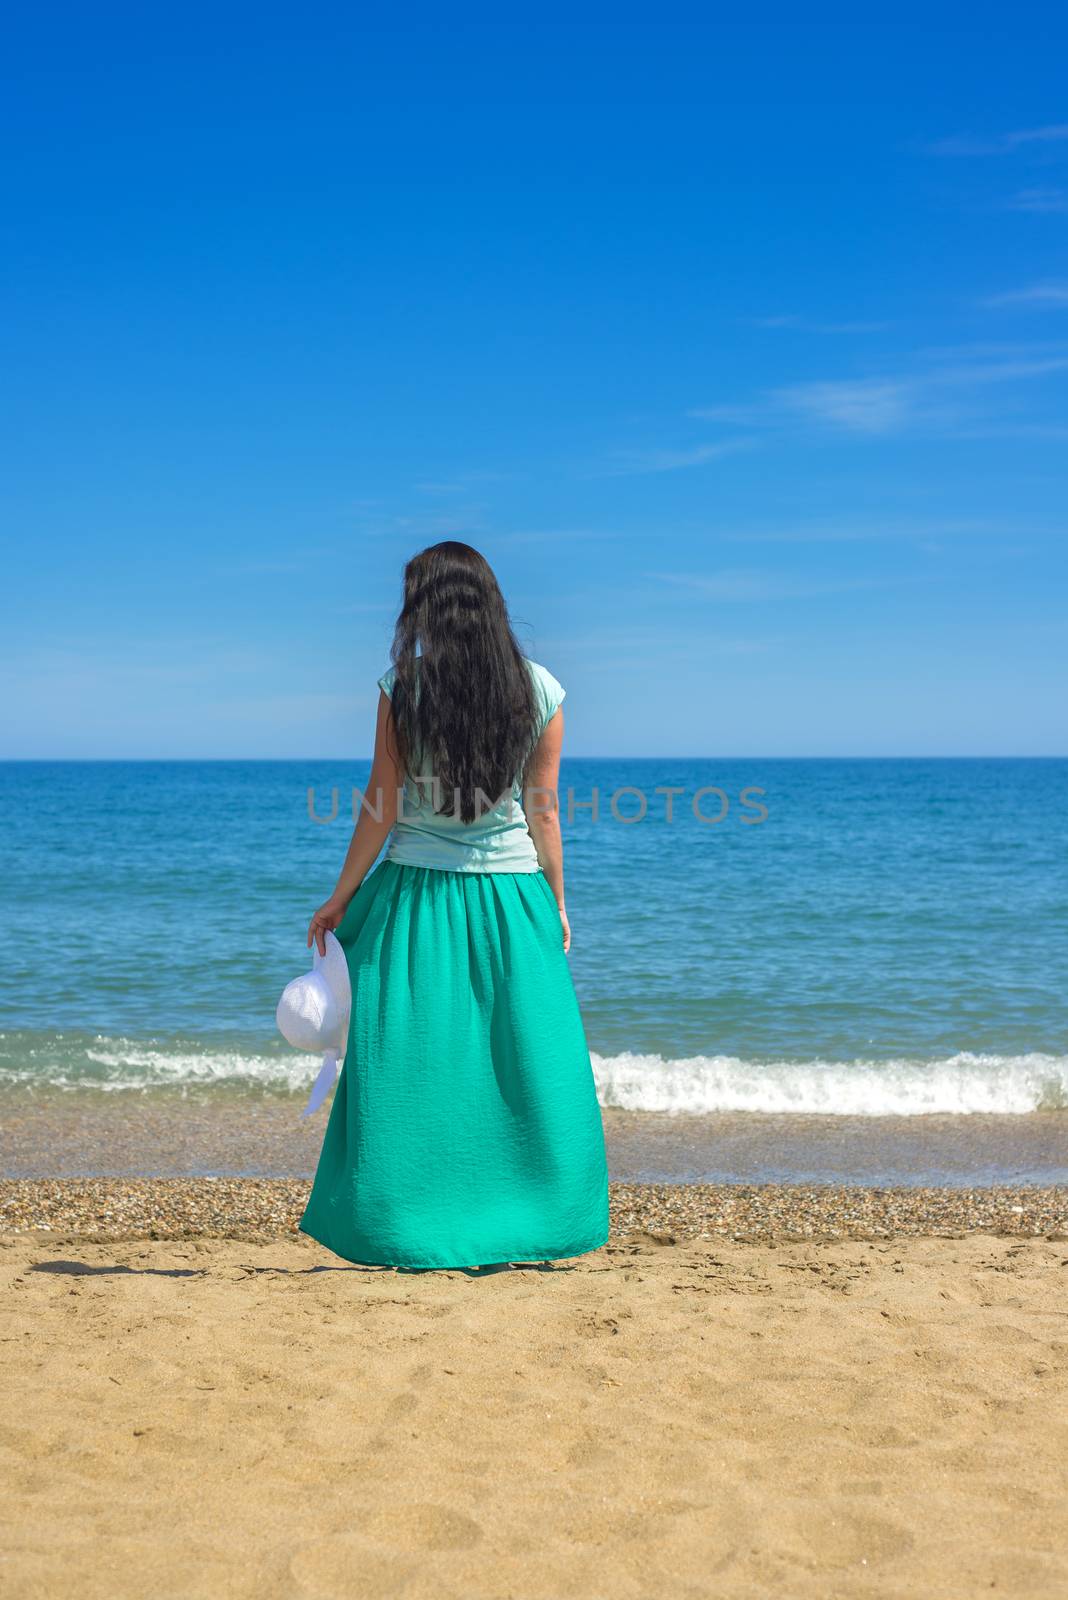 Brunette with long hair standing alone on the sandy beach